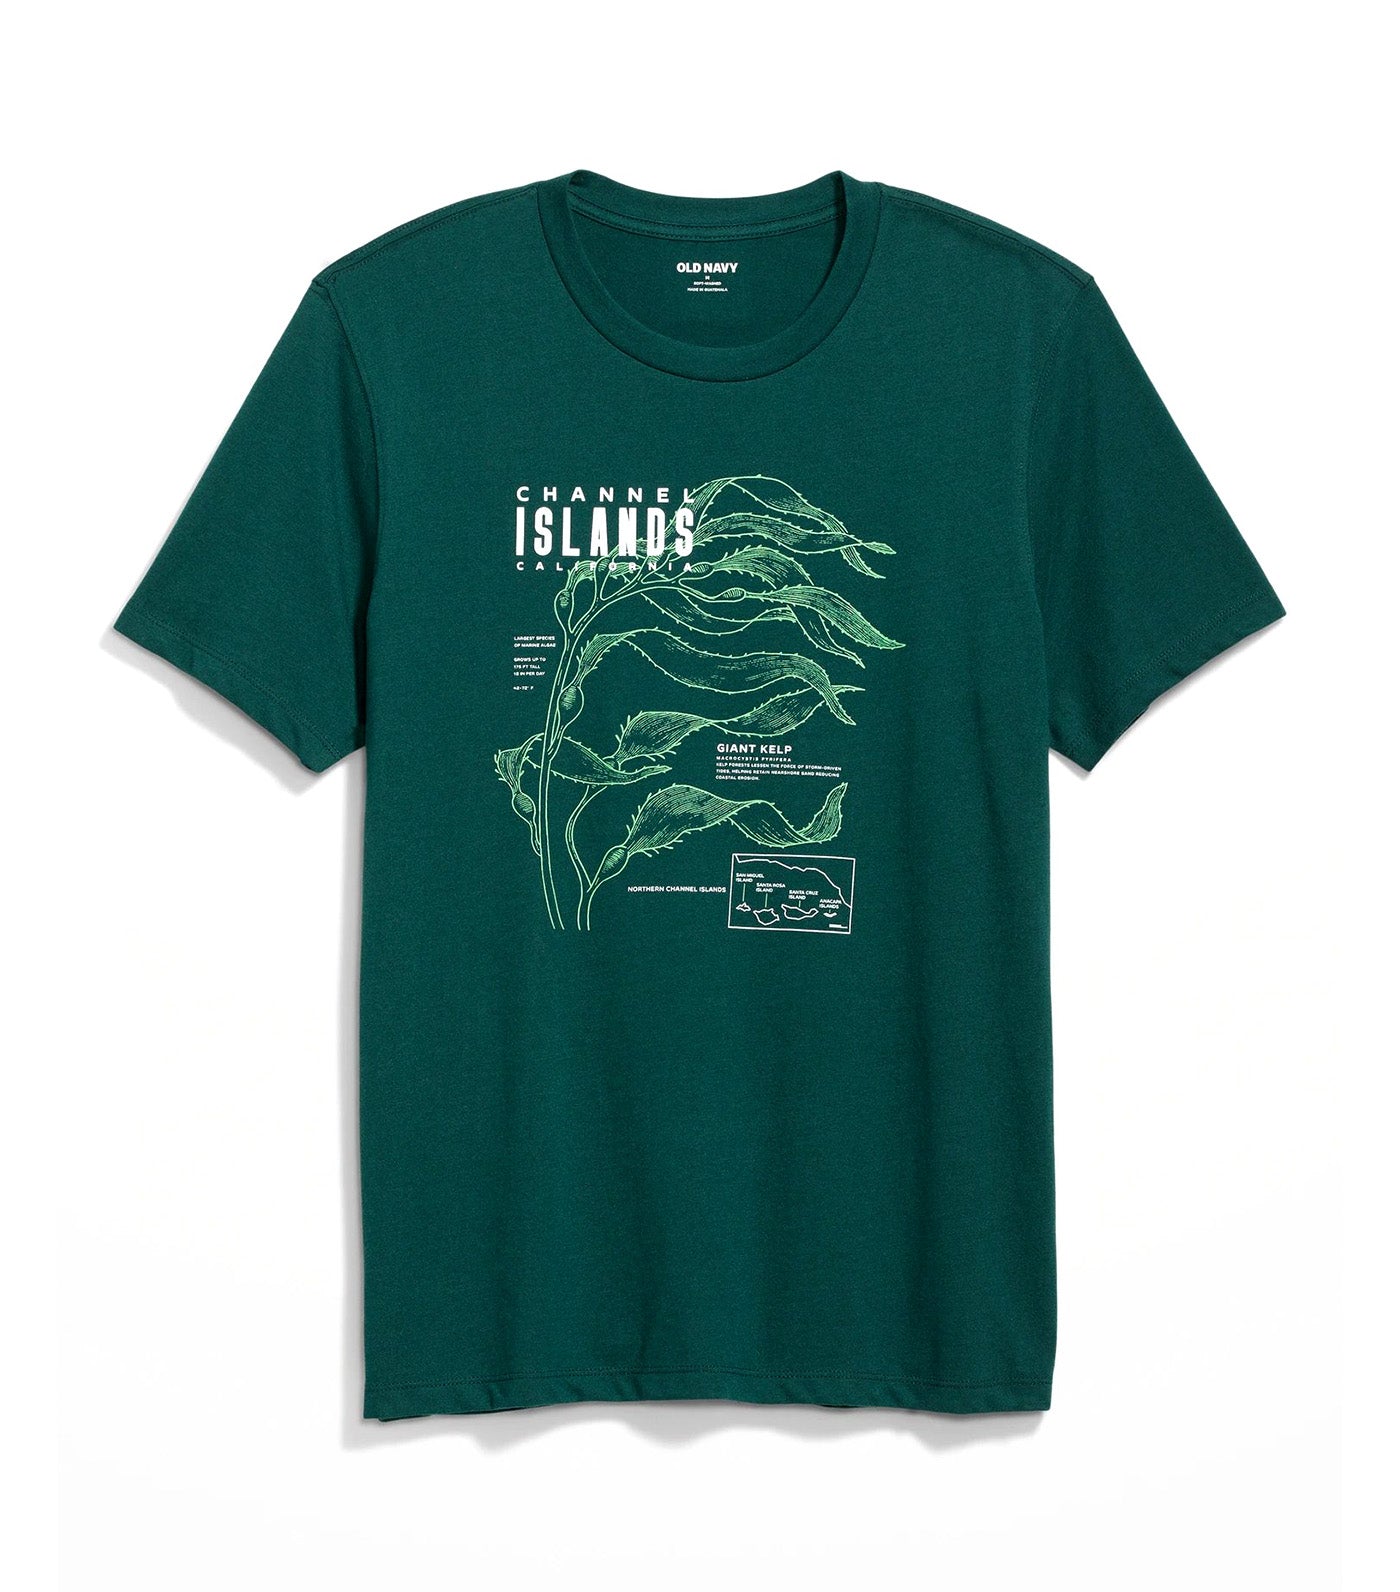 Soft-Washed Graphic T-Shirt for Men Darkwater Teal